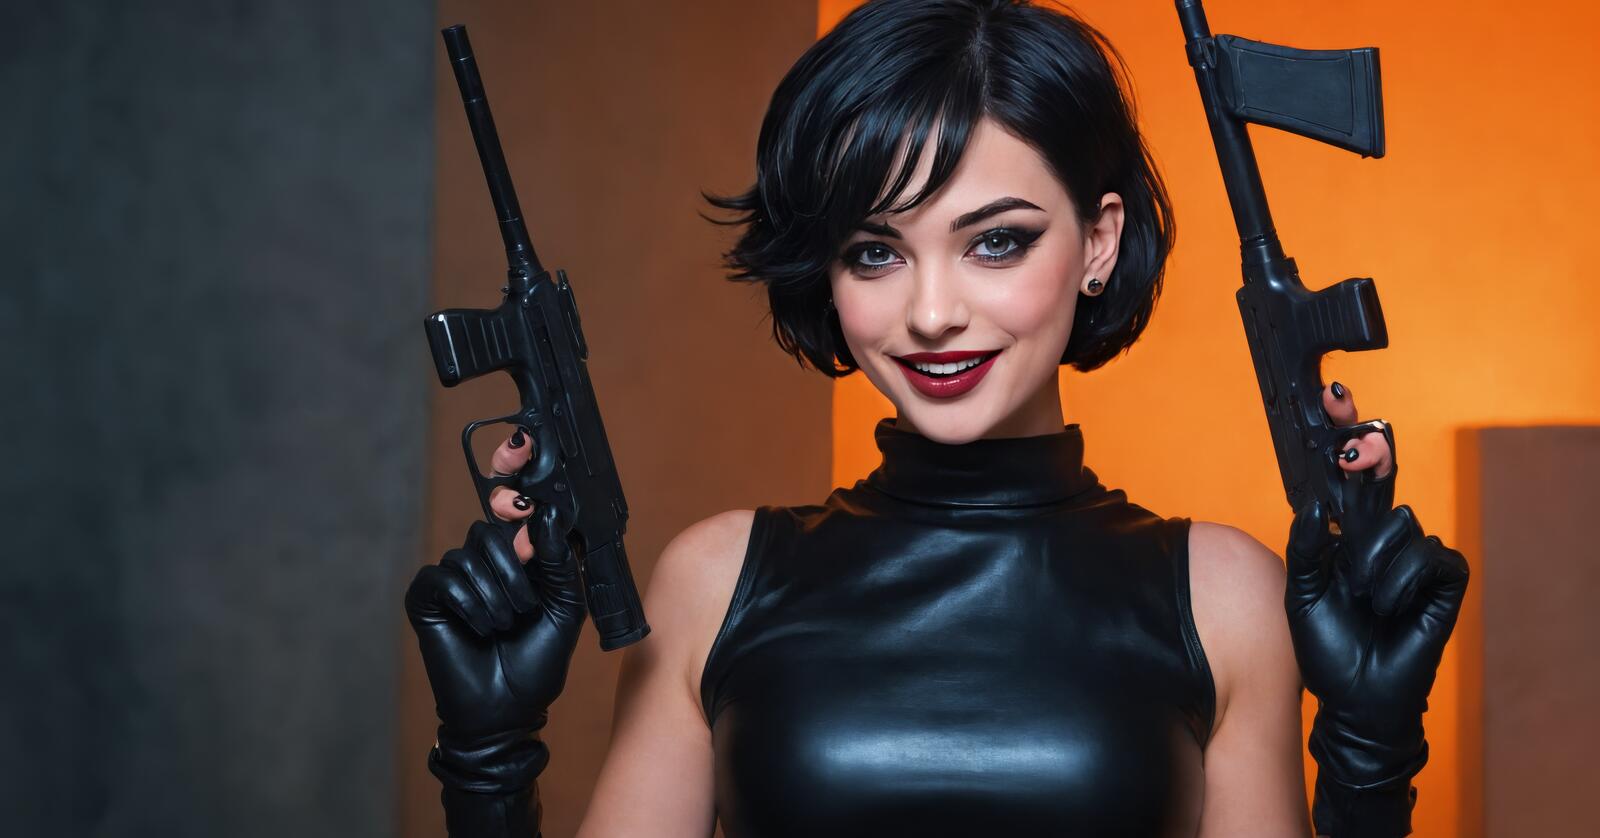 Free photo A woman holding guns and smiling with her hair blown back